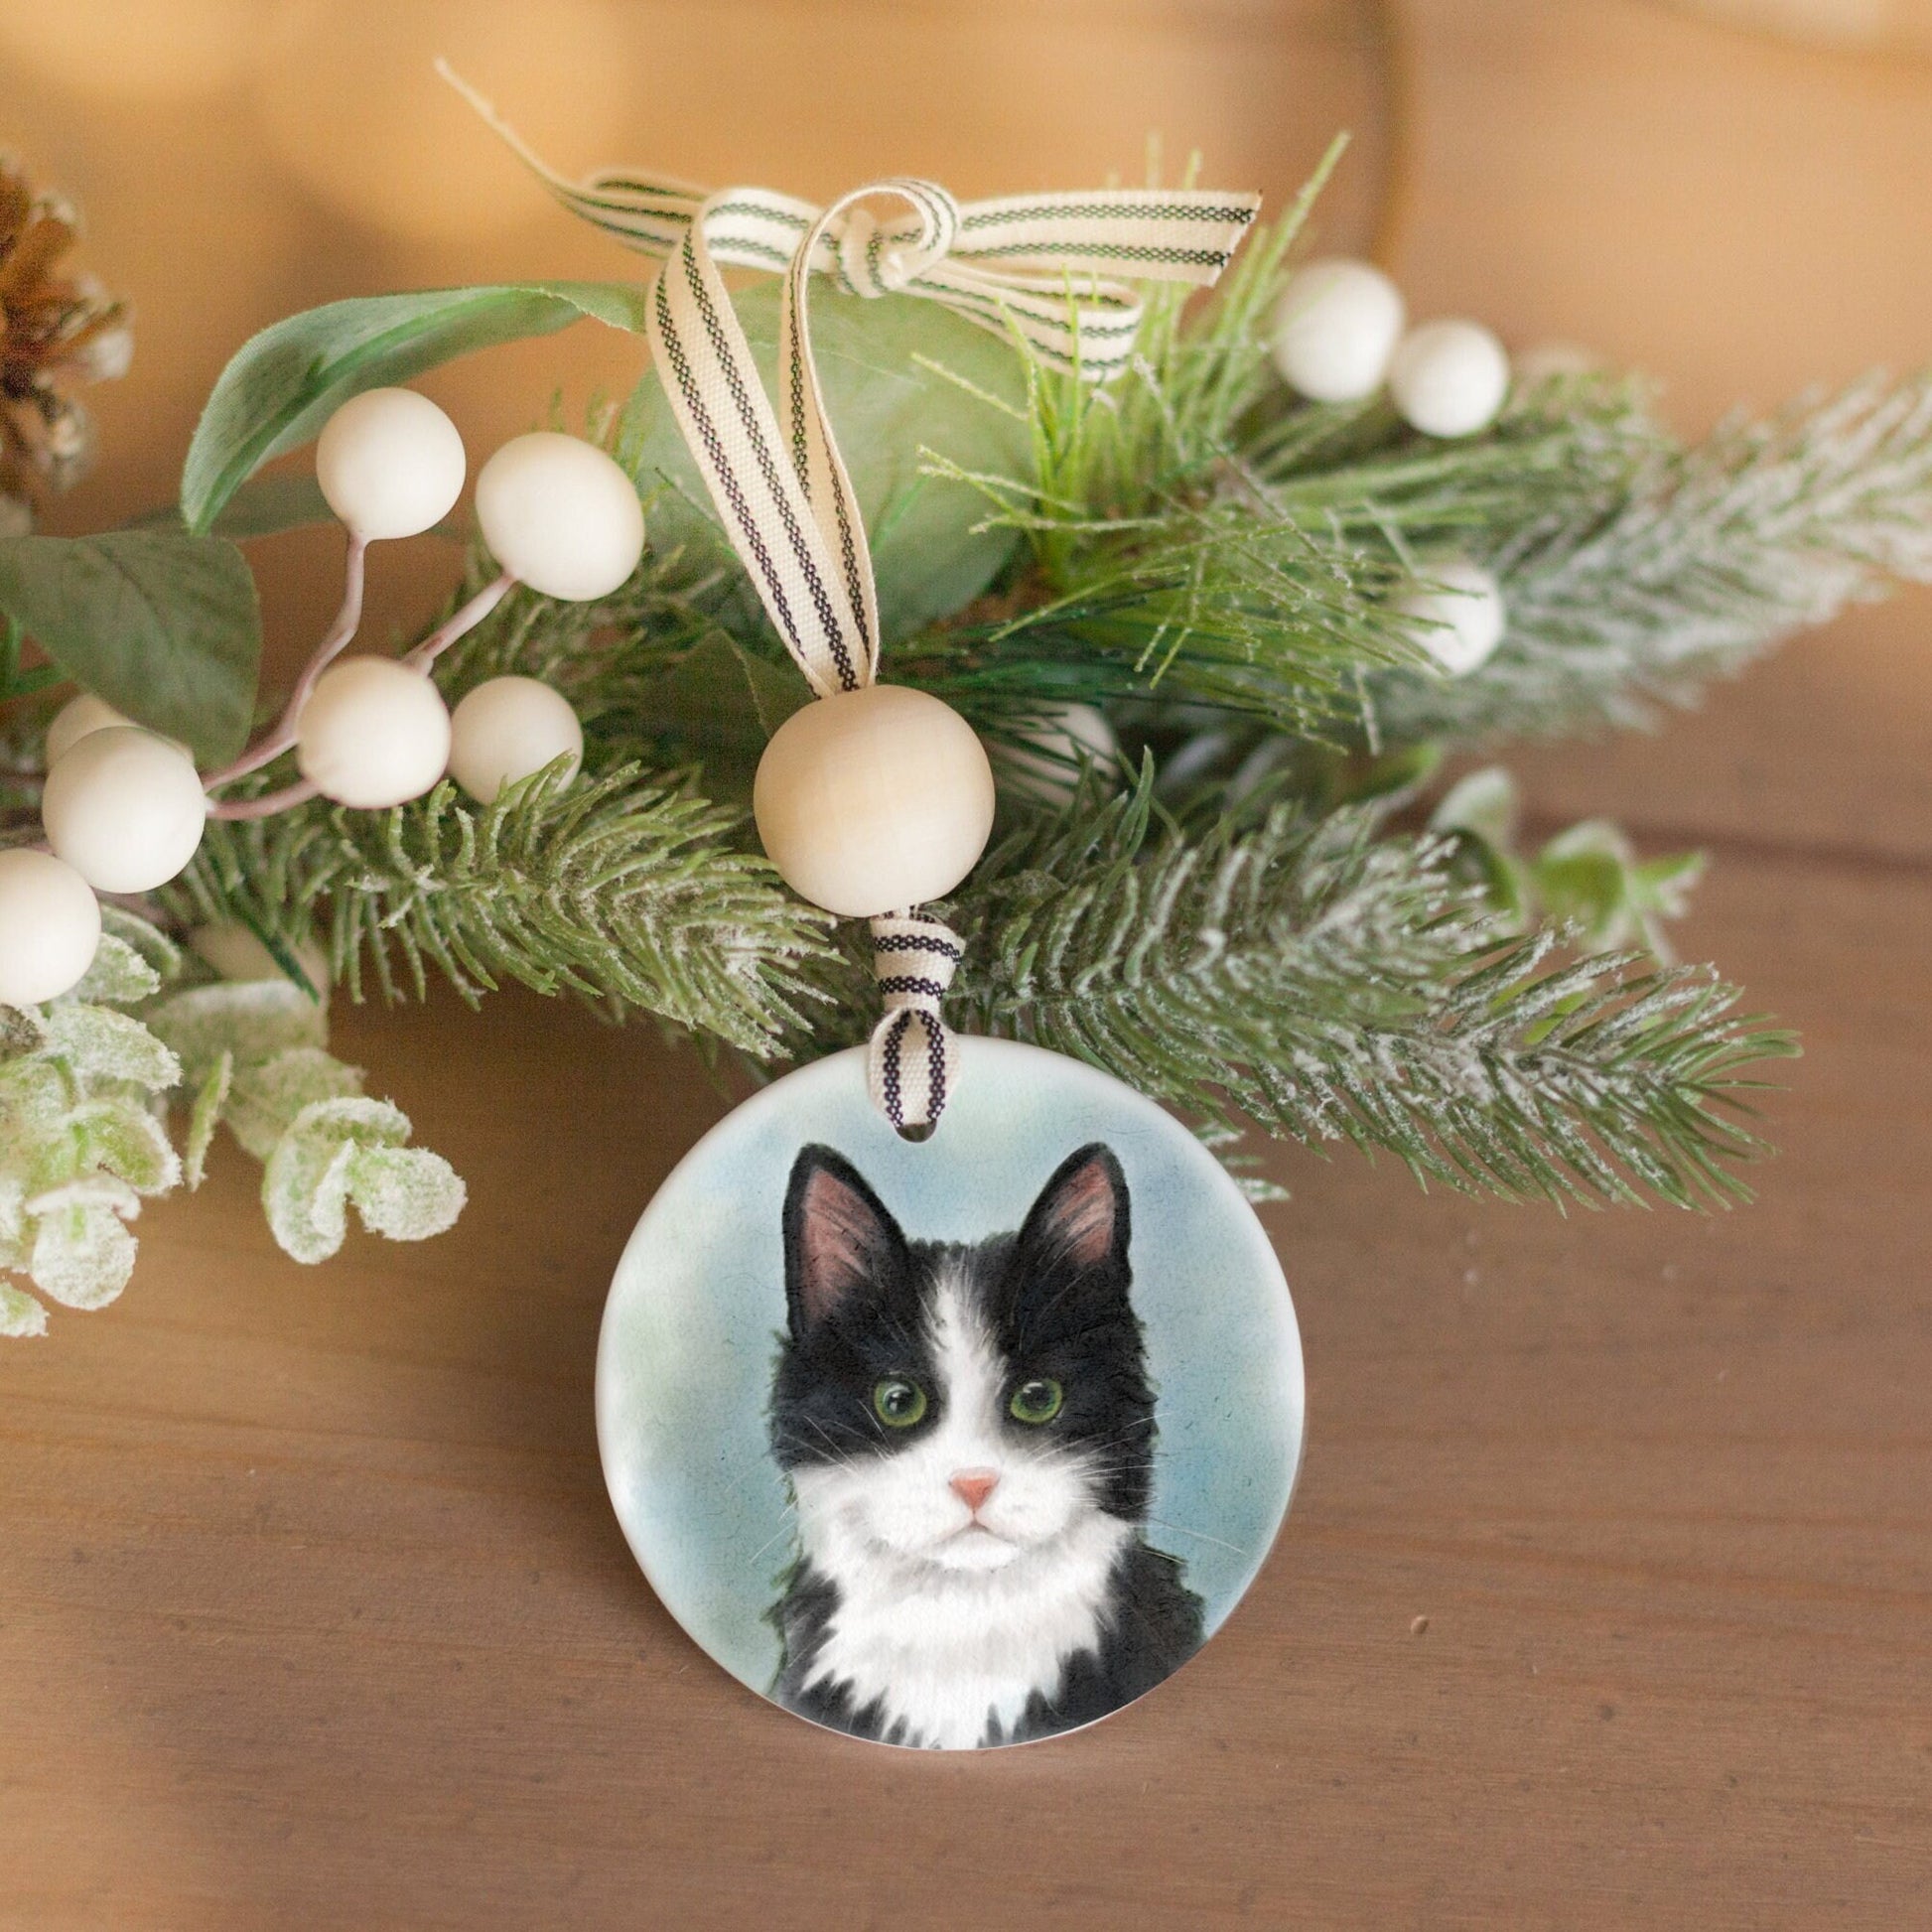 Ceramic ornament with watercolor artwork of a black and white tuxedo cat on it.